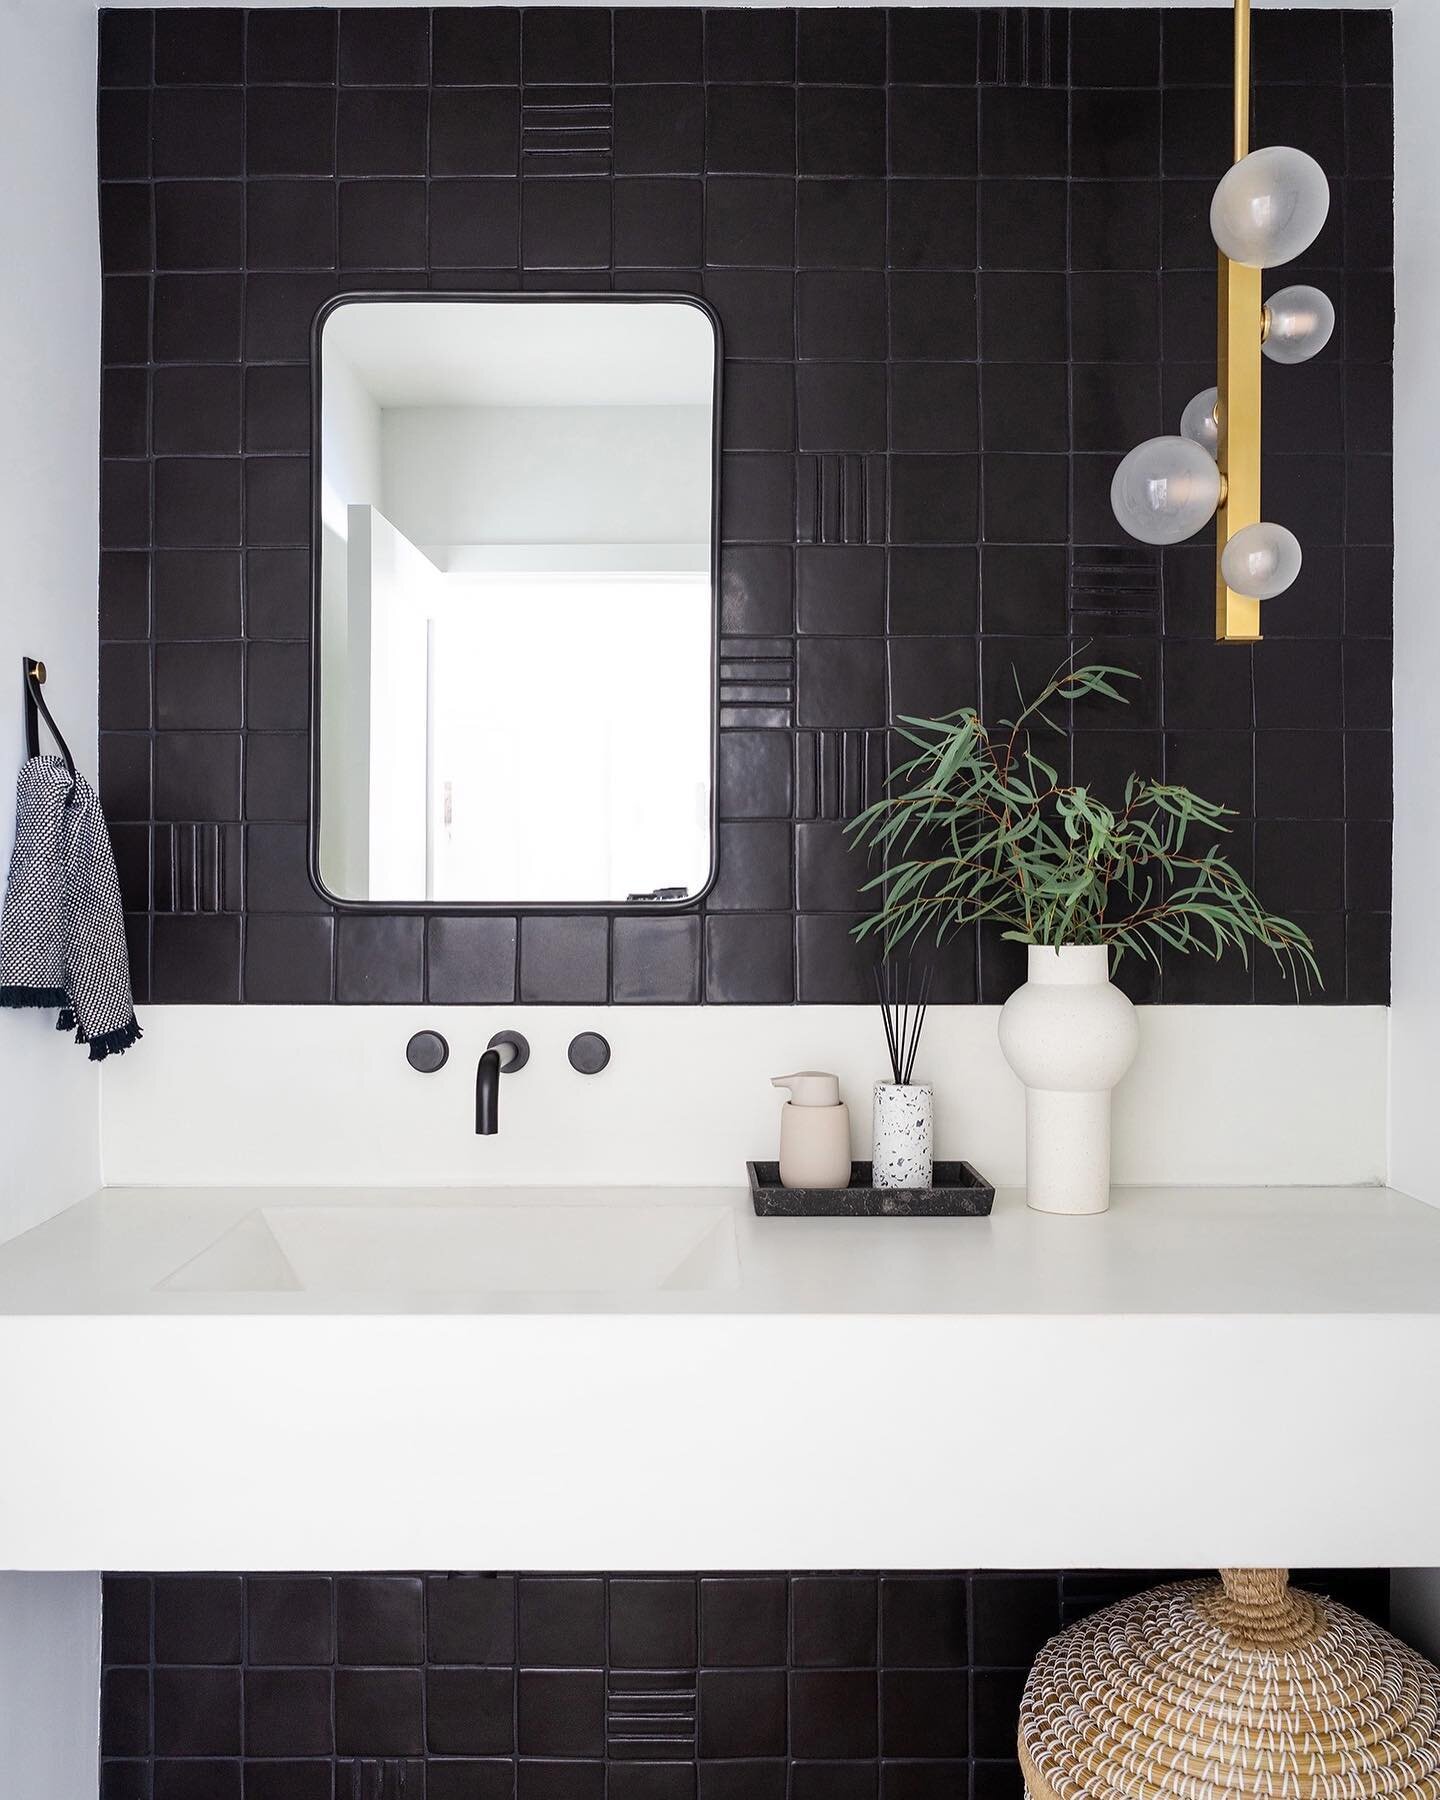 Powder bath goodness with its custom layout in matte black tile + concrete integrated sink.  And the prettiest pendant - she&rsquo;s a moment. ▪️▪️▪️▪️

Design: [FIXE]
Photo: @lanedittoe
#FIXExNautilus
&bull;
&bull;
&bull;
&bull;
&bull;
#FIXEdesignho